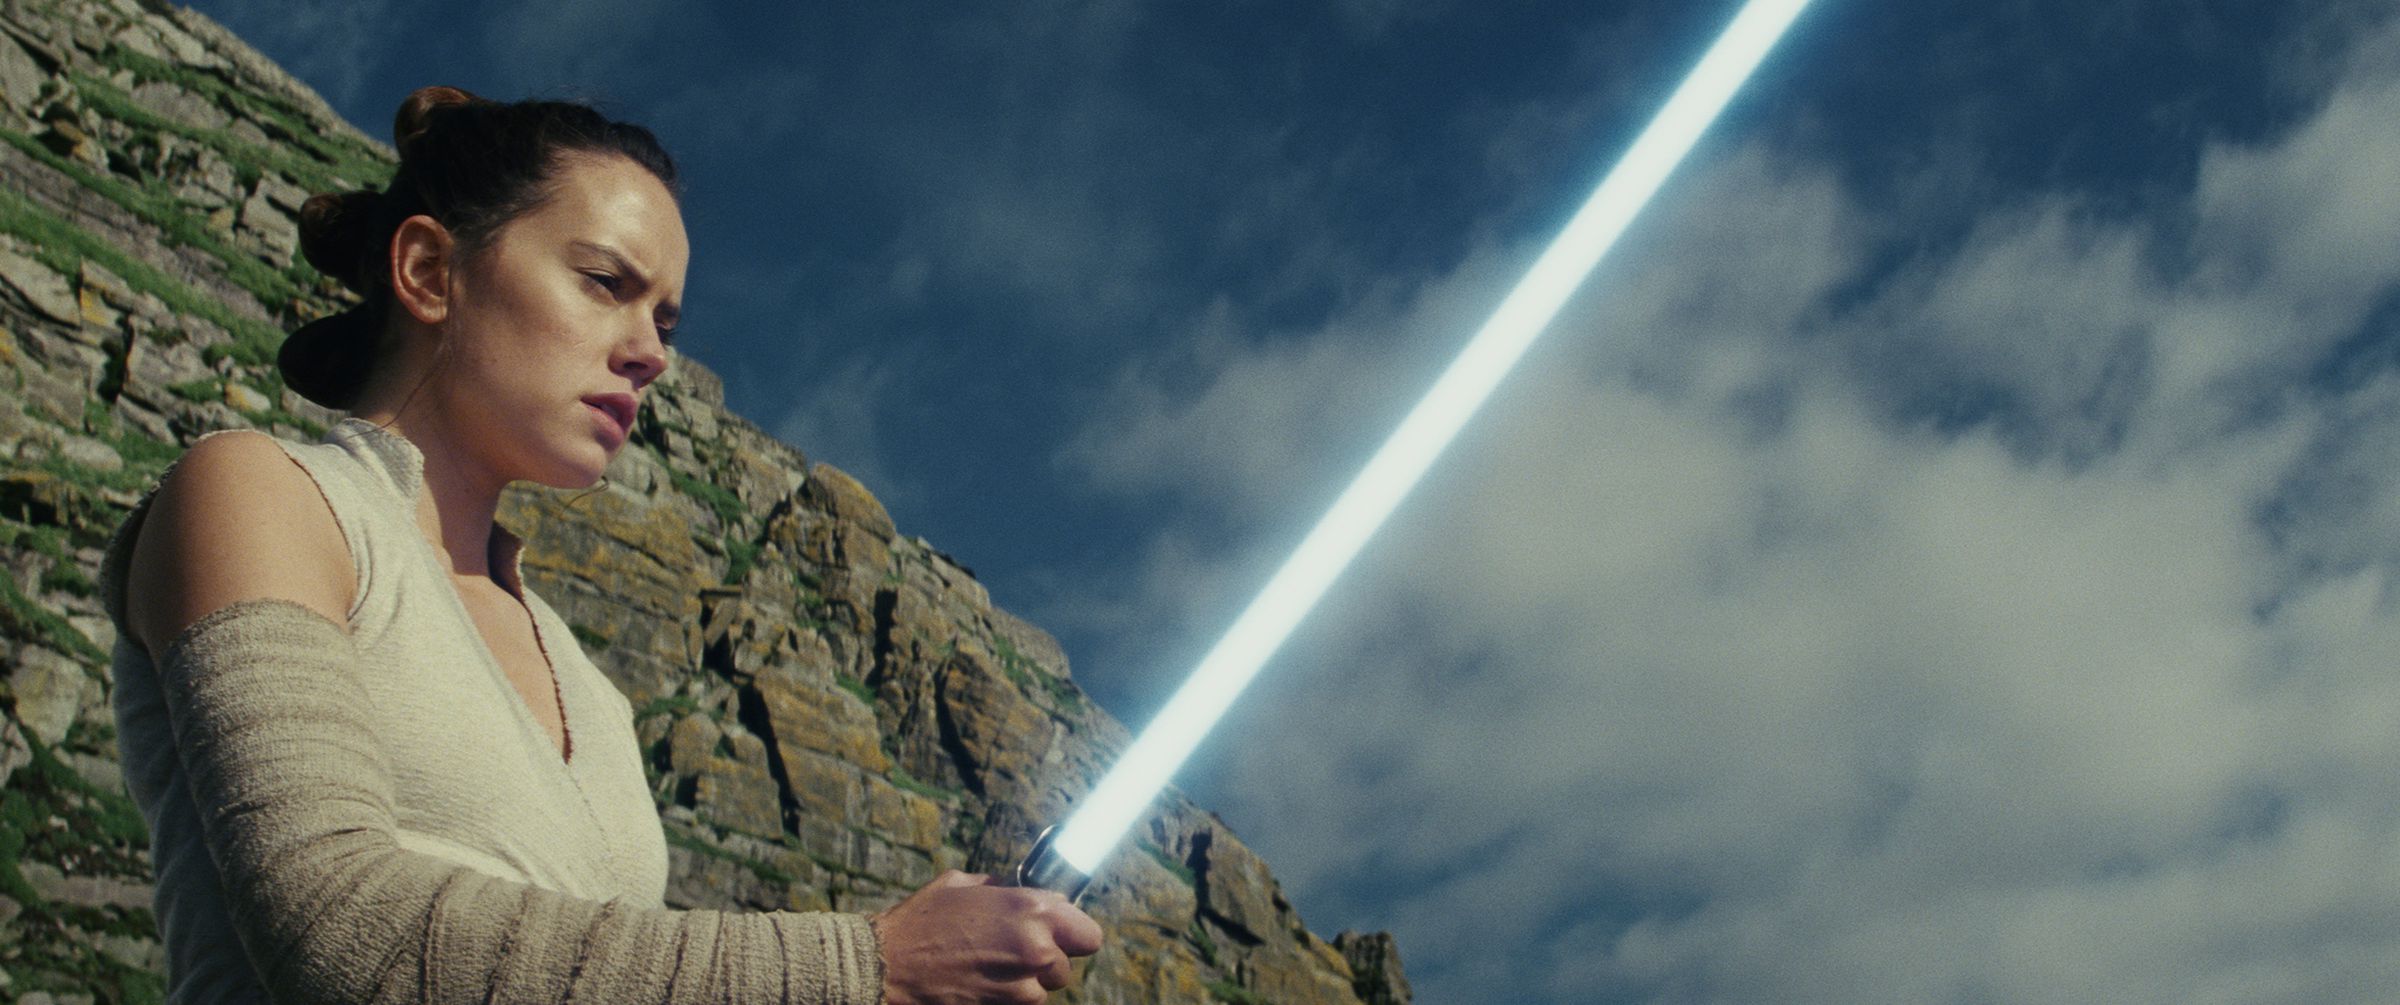 Daisy Ridley holding up a lightsaber in Star Wars: The Last Jedi.